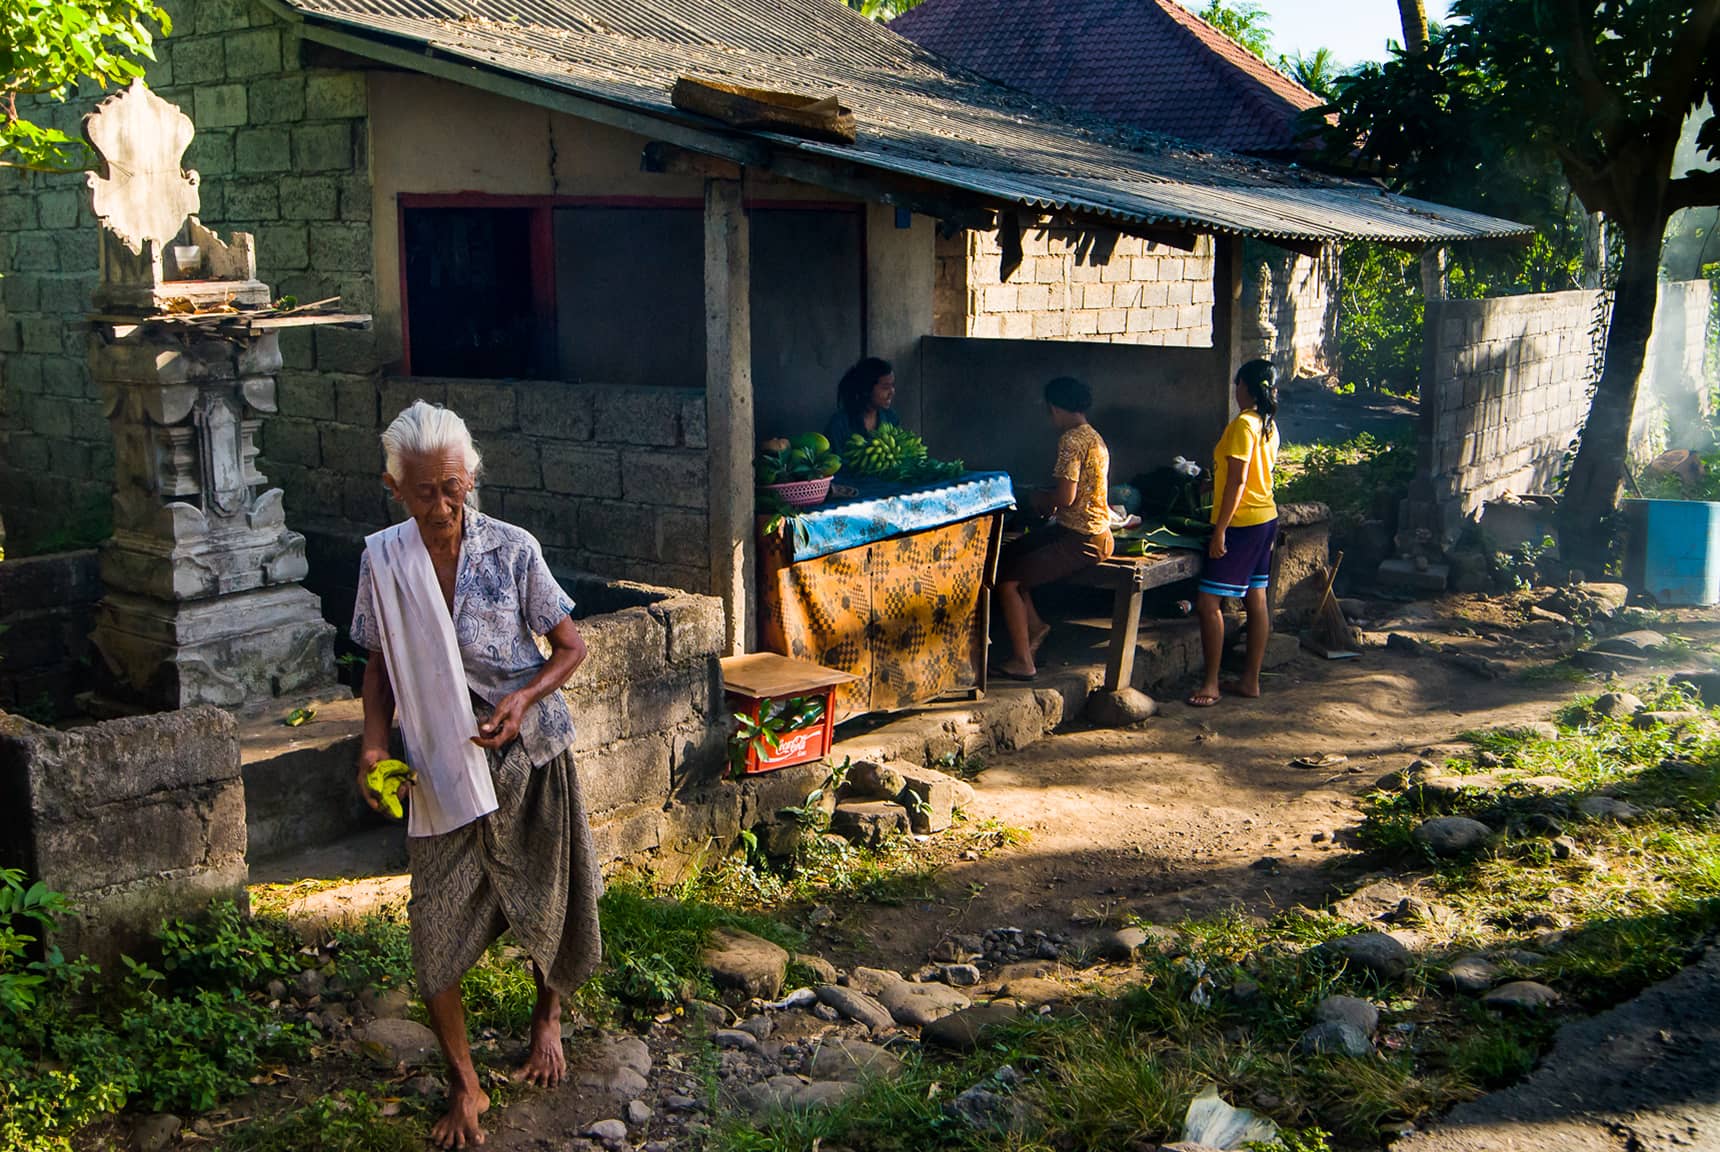 Professional Cultural Photography: Village Life in Bali